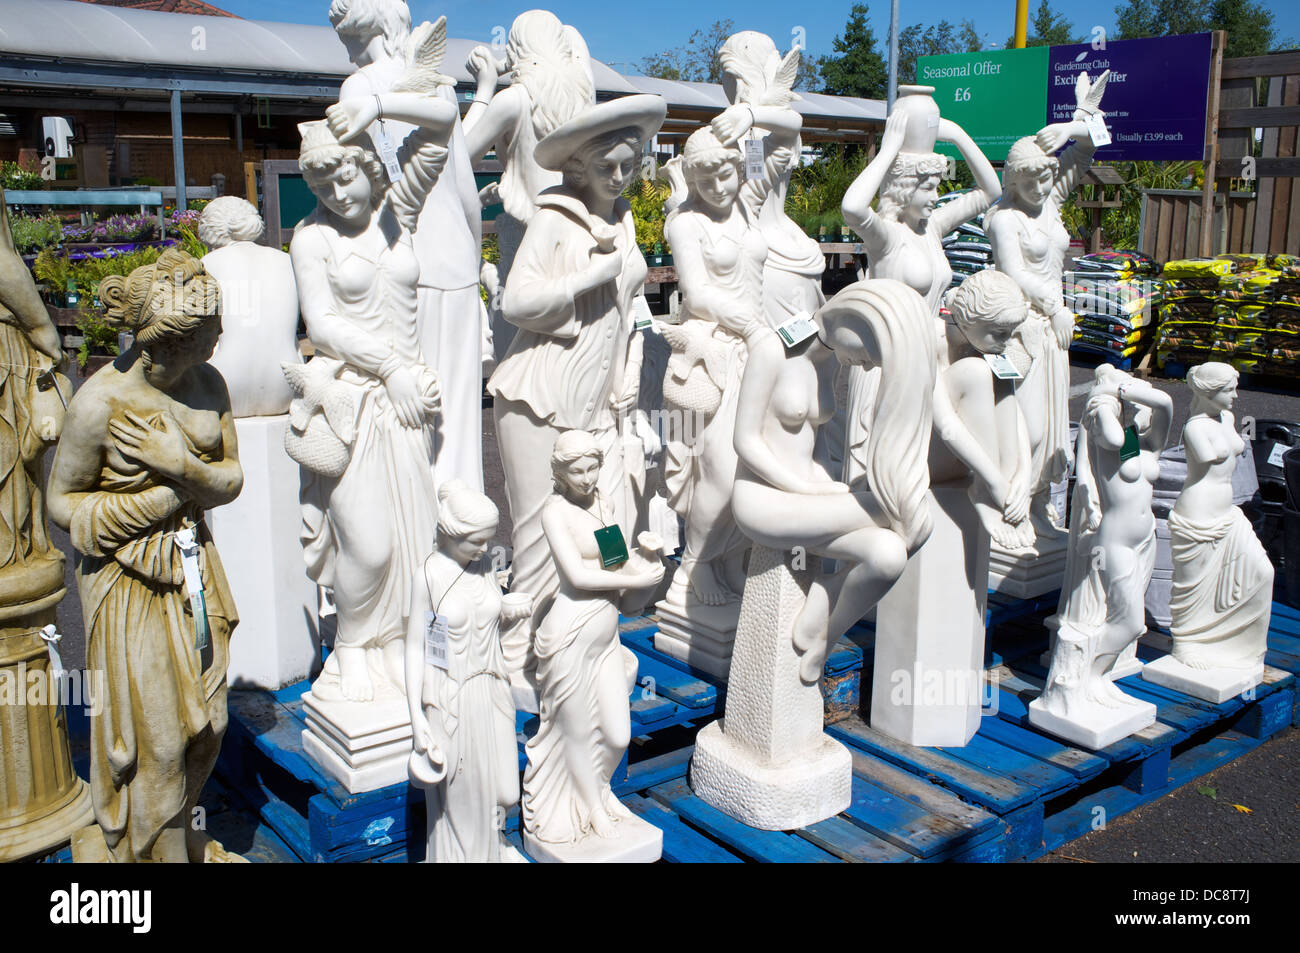 Garden statues for sale at garden centre Stock Photo - Alamy